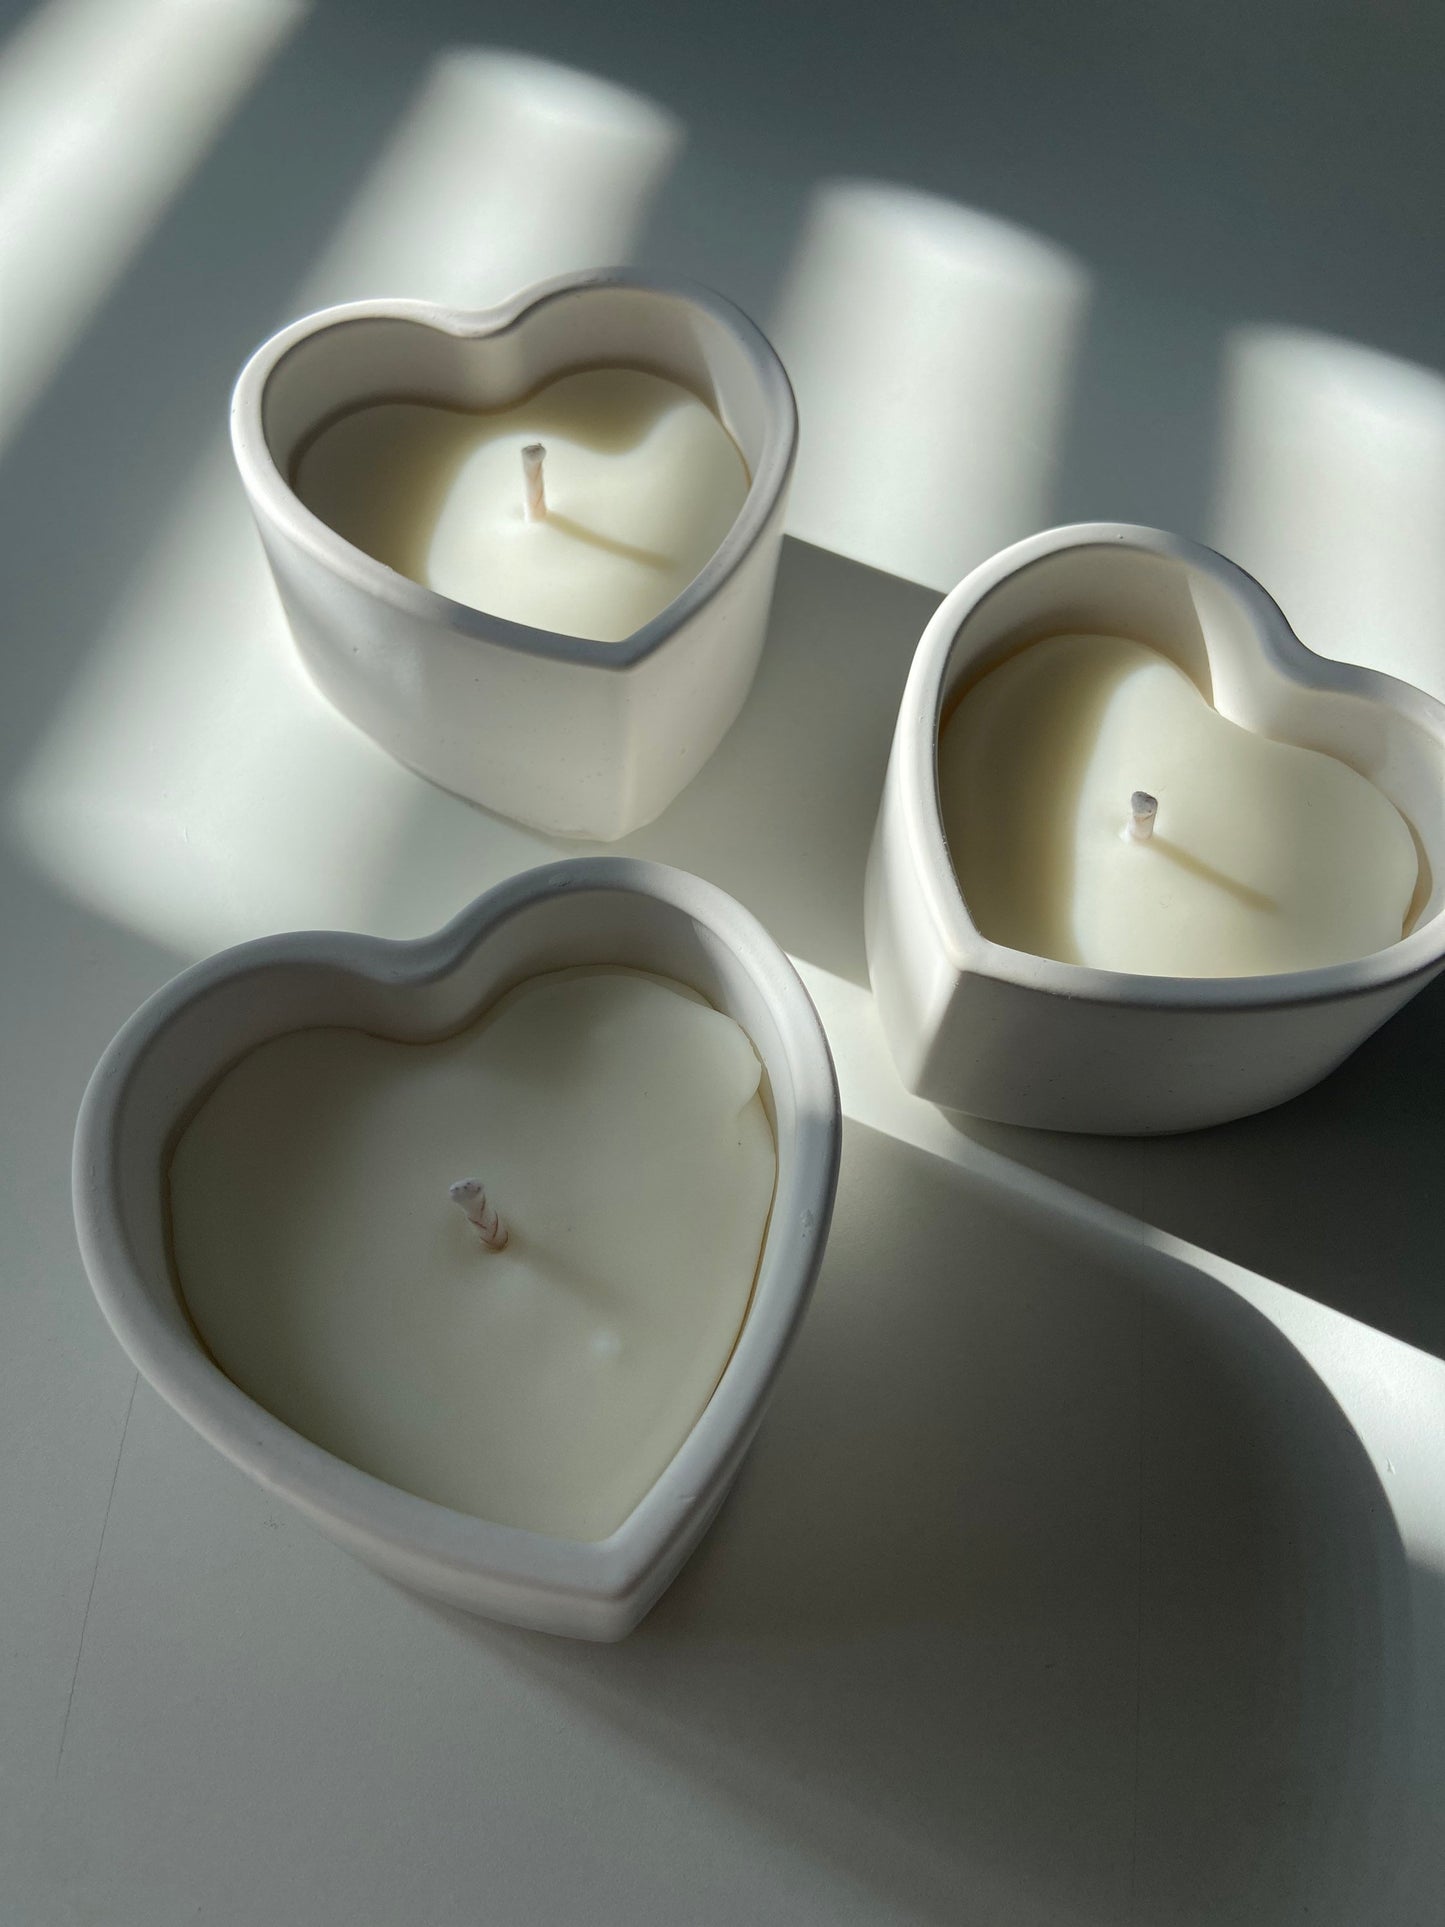 Stone Heart Candle Pot | Candle Set | Cute Candles | Heart Shaped Candles | Love Heart Candles | Concrete Candle Pot